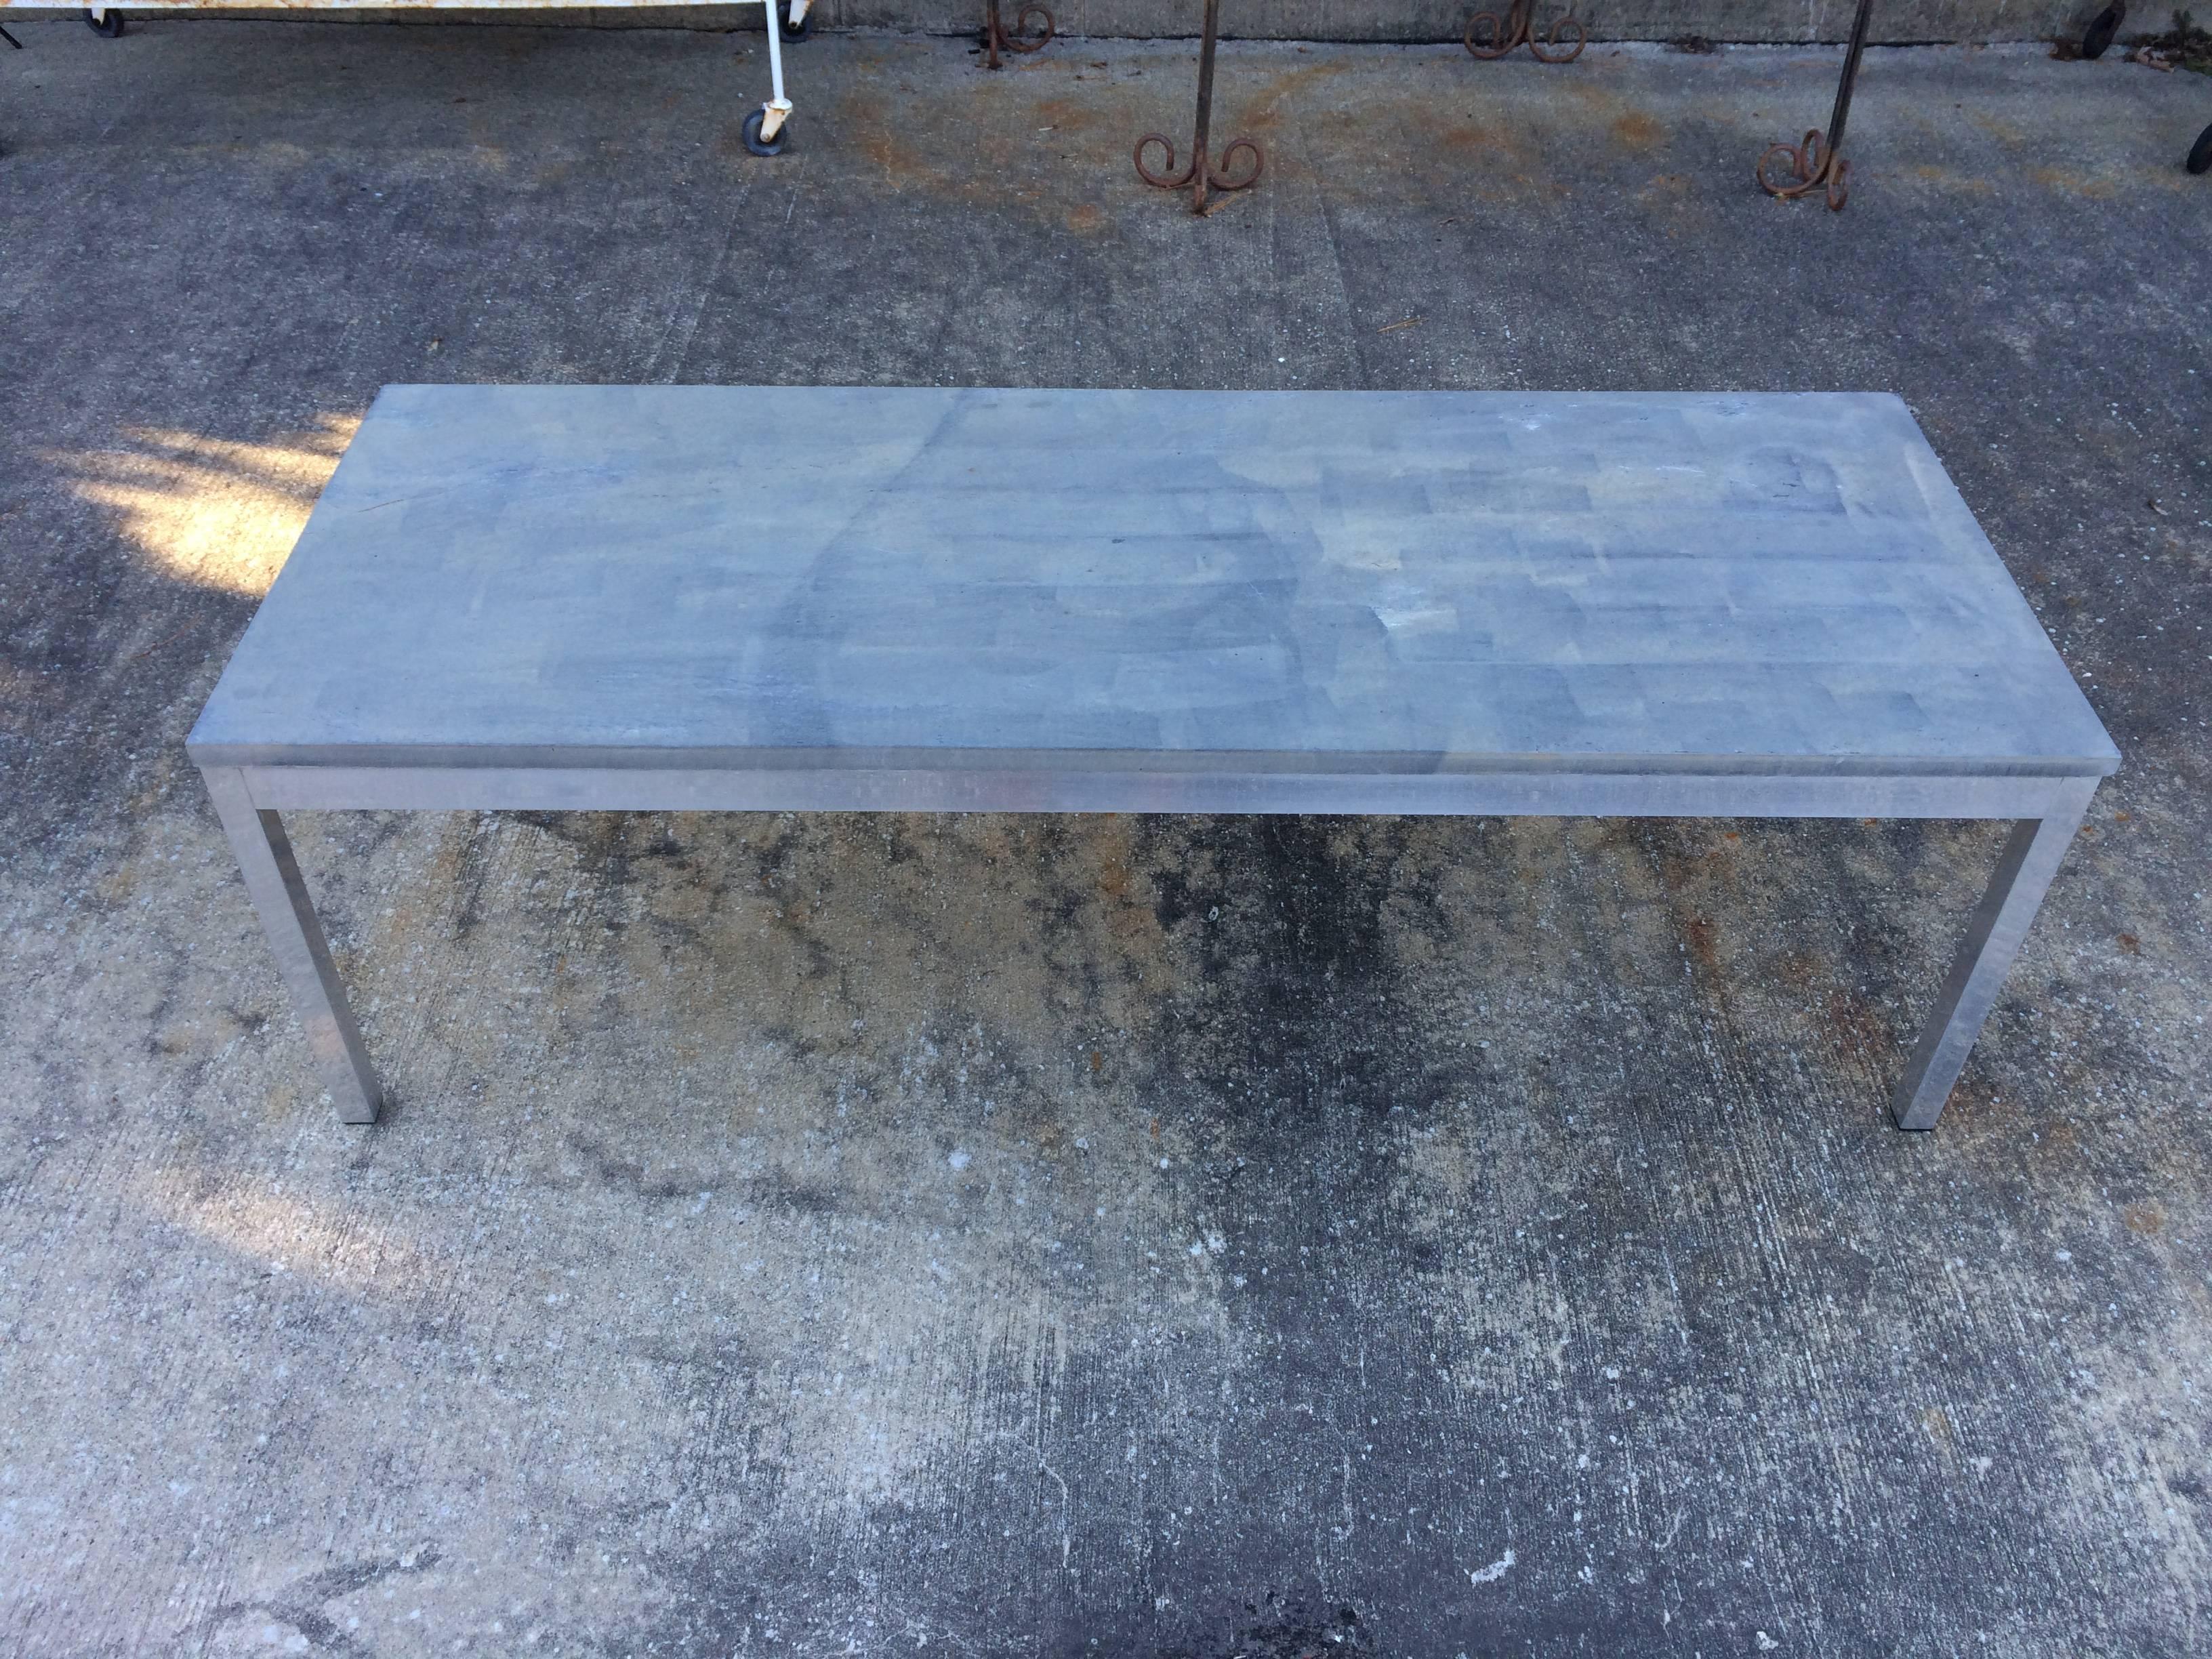 Slate coffee table with aluminum base. Perfect for both in or outdoors. Sleek lines and muted gray tone make up this minimalist table. Perfect for in or outdoor.
Please request updated photos as it has weathered a bit from being outside on our